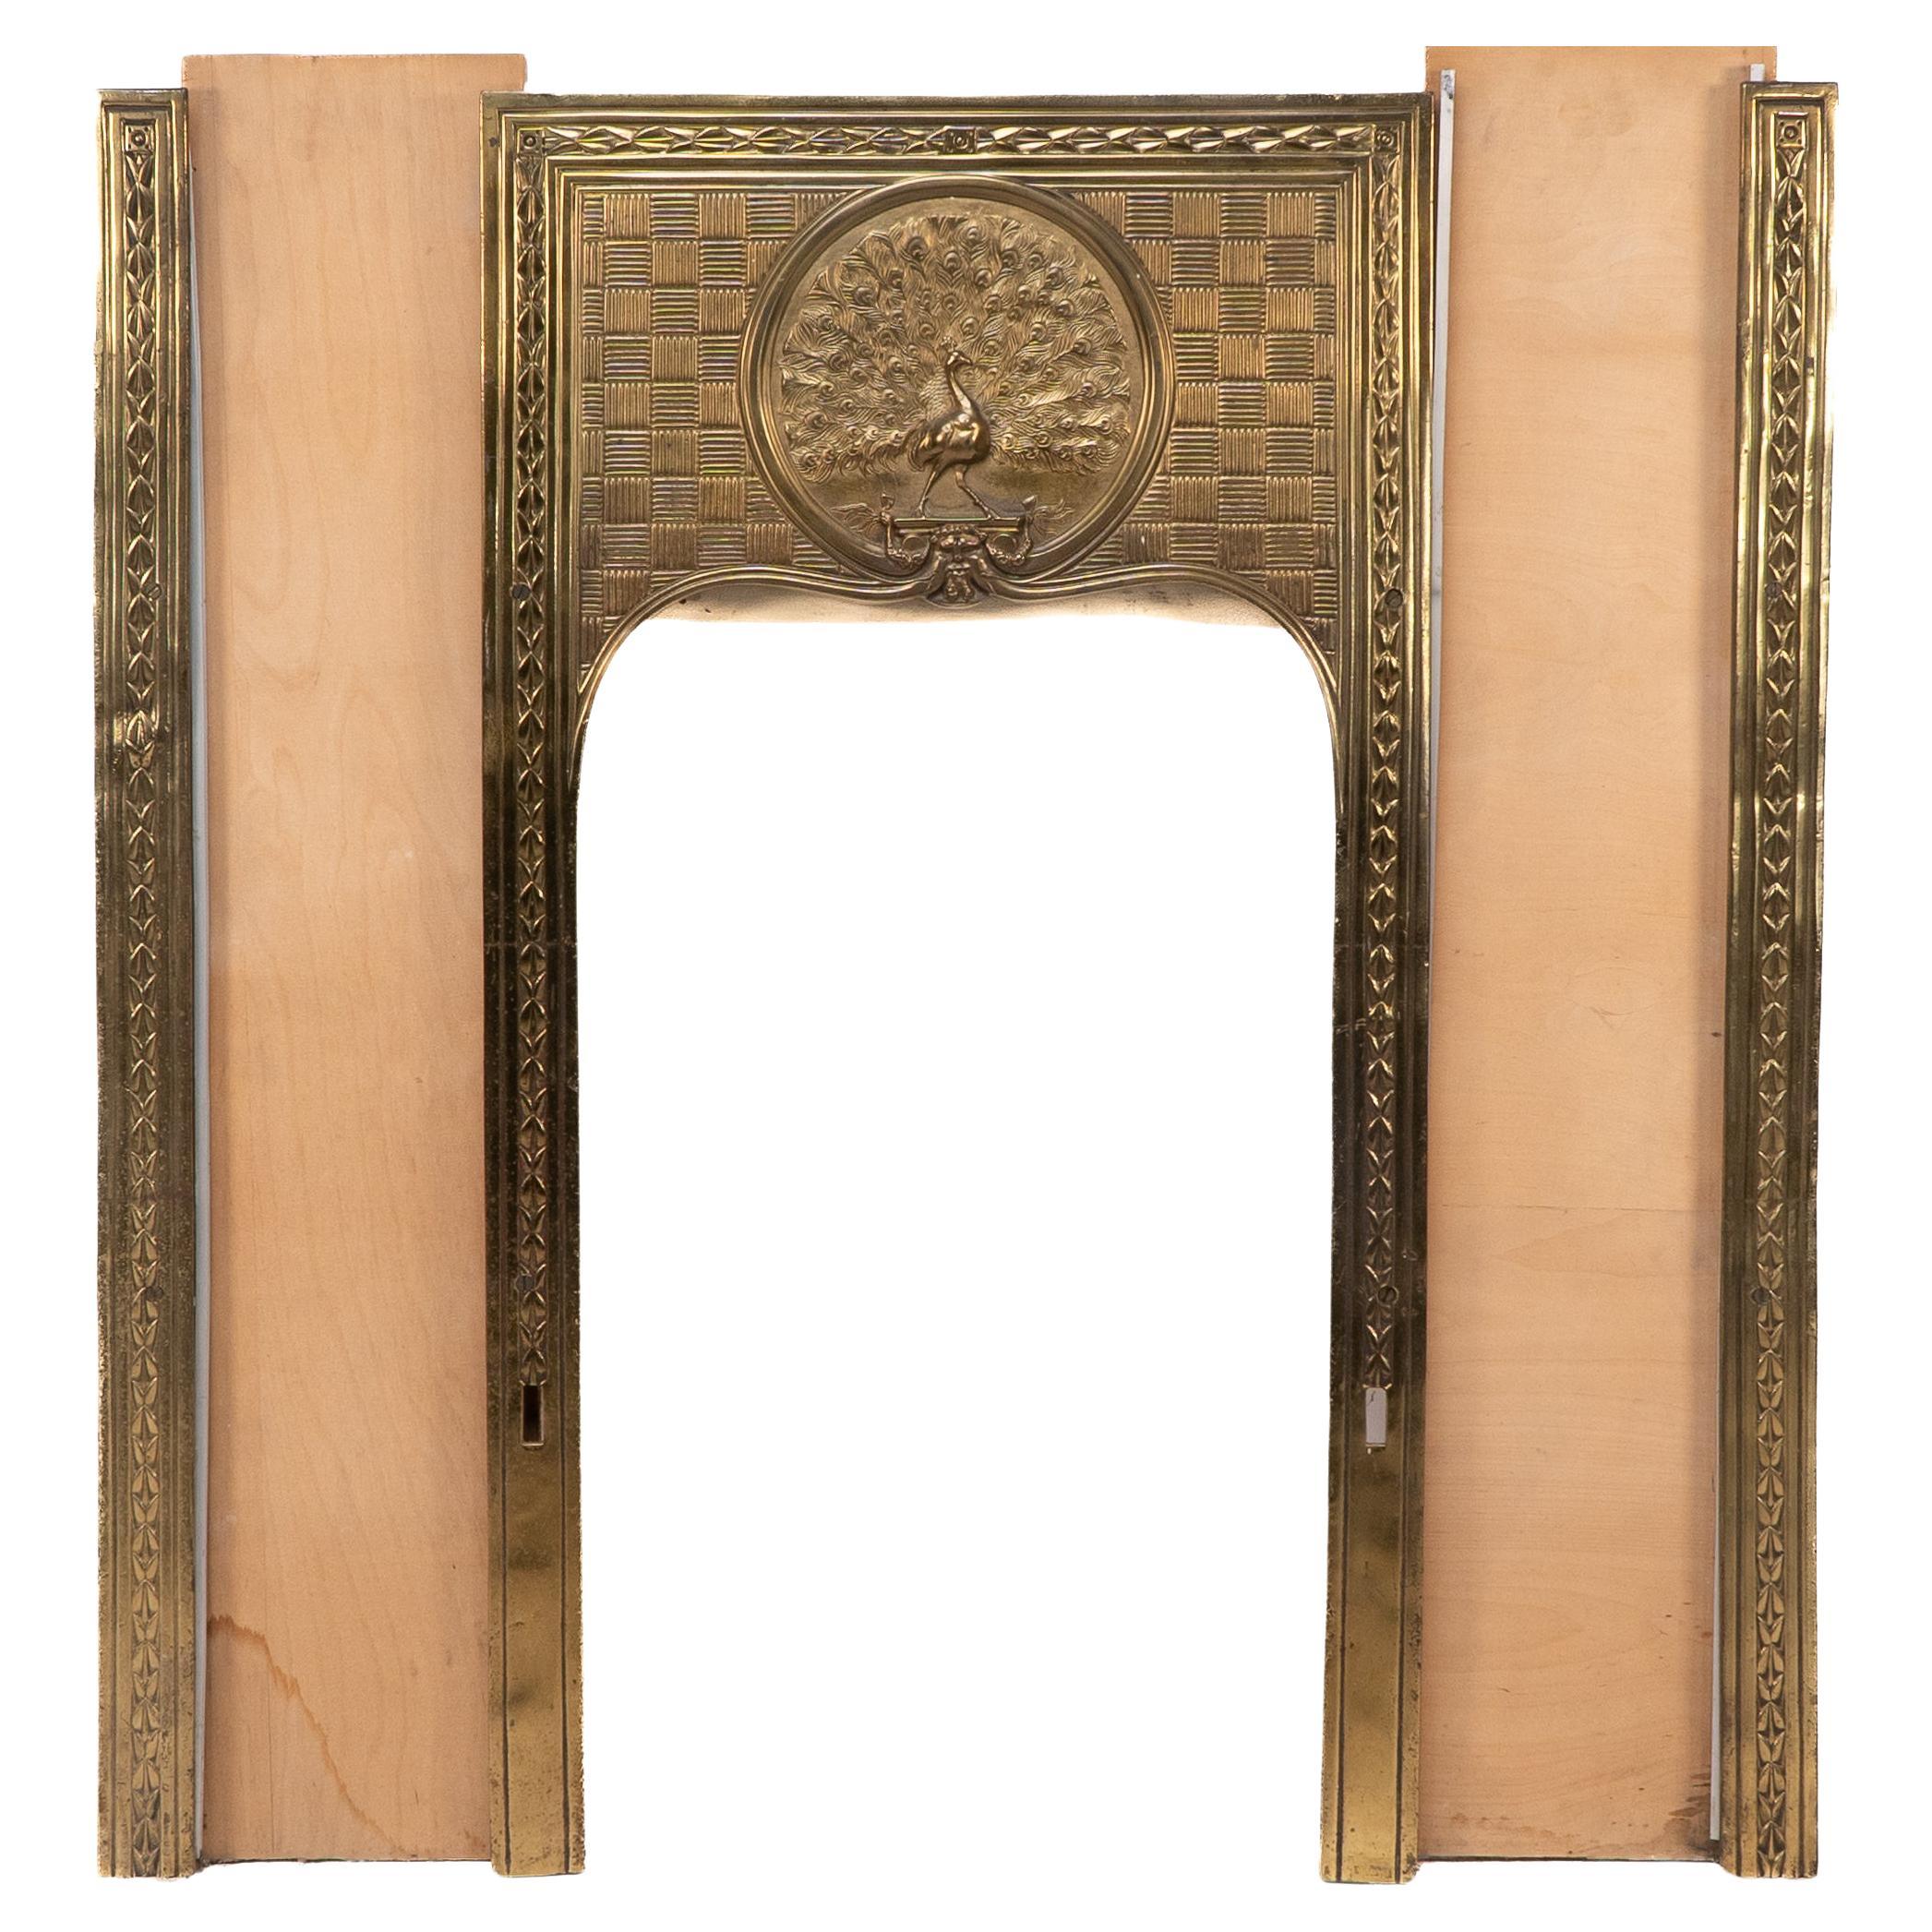 T. Elsley attri. Aesthetic Movement brass fire insert w. upper central peacock For Sale